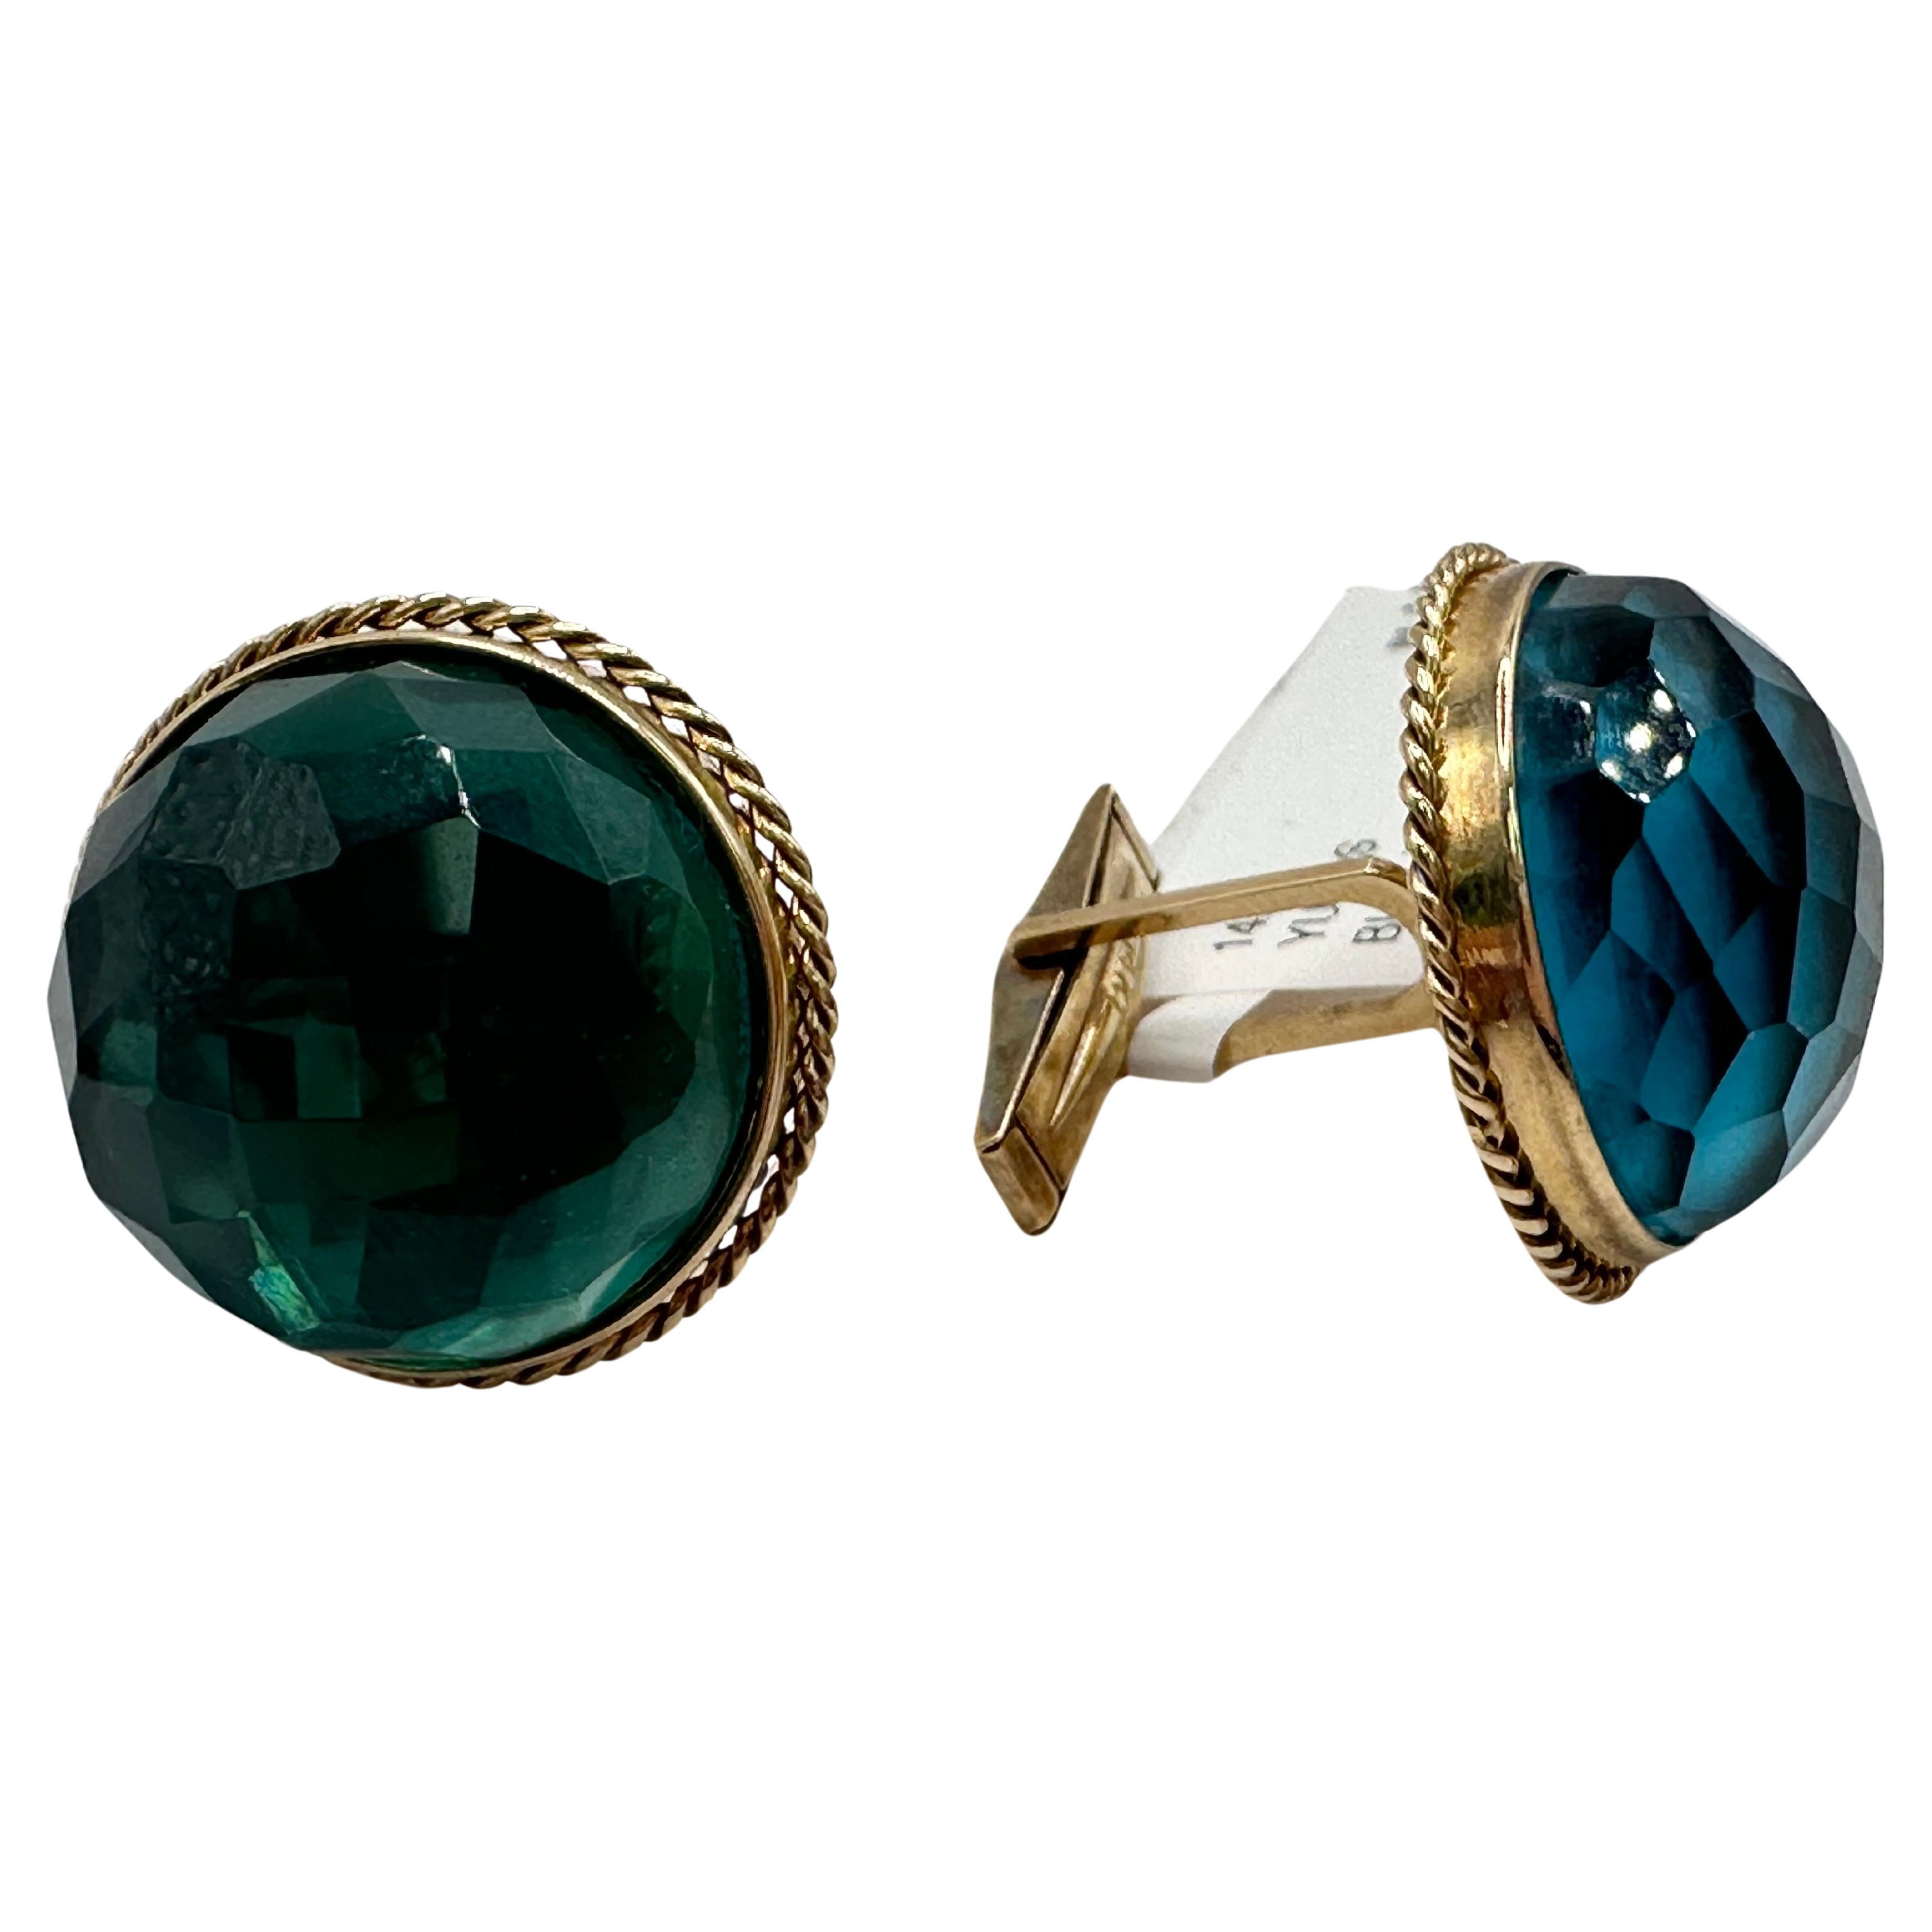 Exquisite mens cufflinks made with one London Blue topaz and one London blue topaz, the designer who made them wanted them to be the same stone but slightly different colors at some point in Europe this was popular to mismatch cufflinks. These are